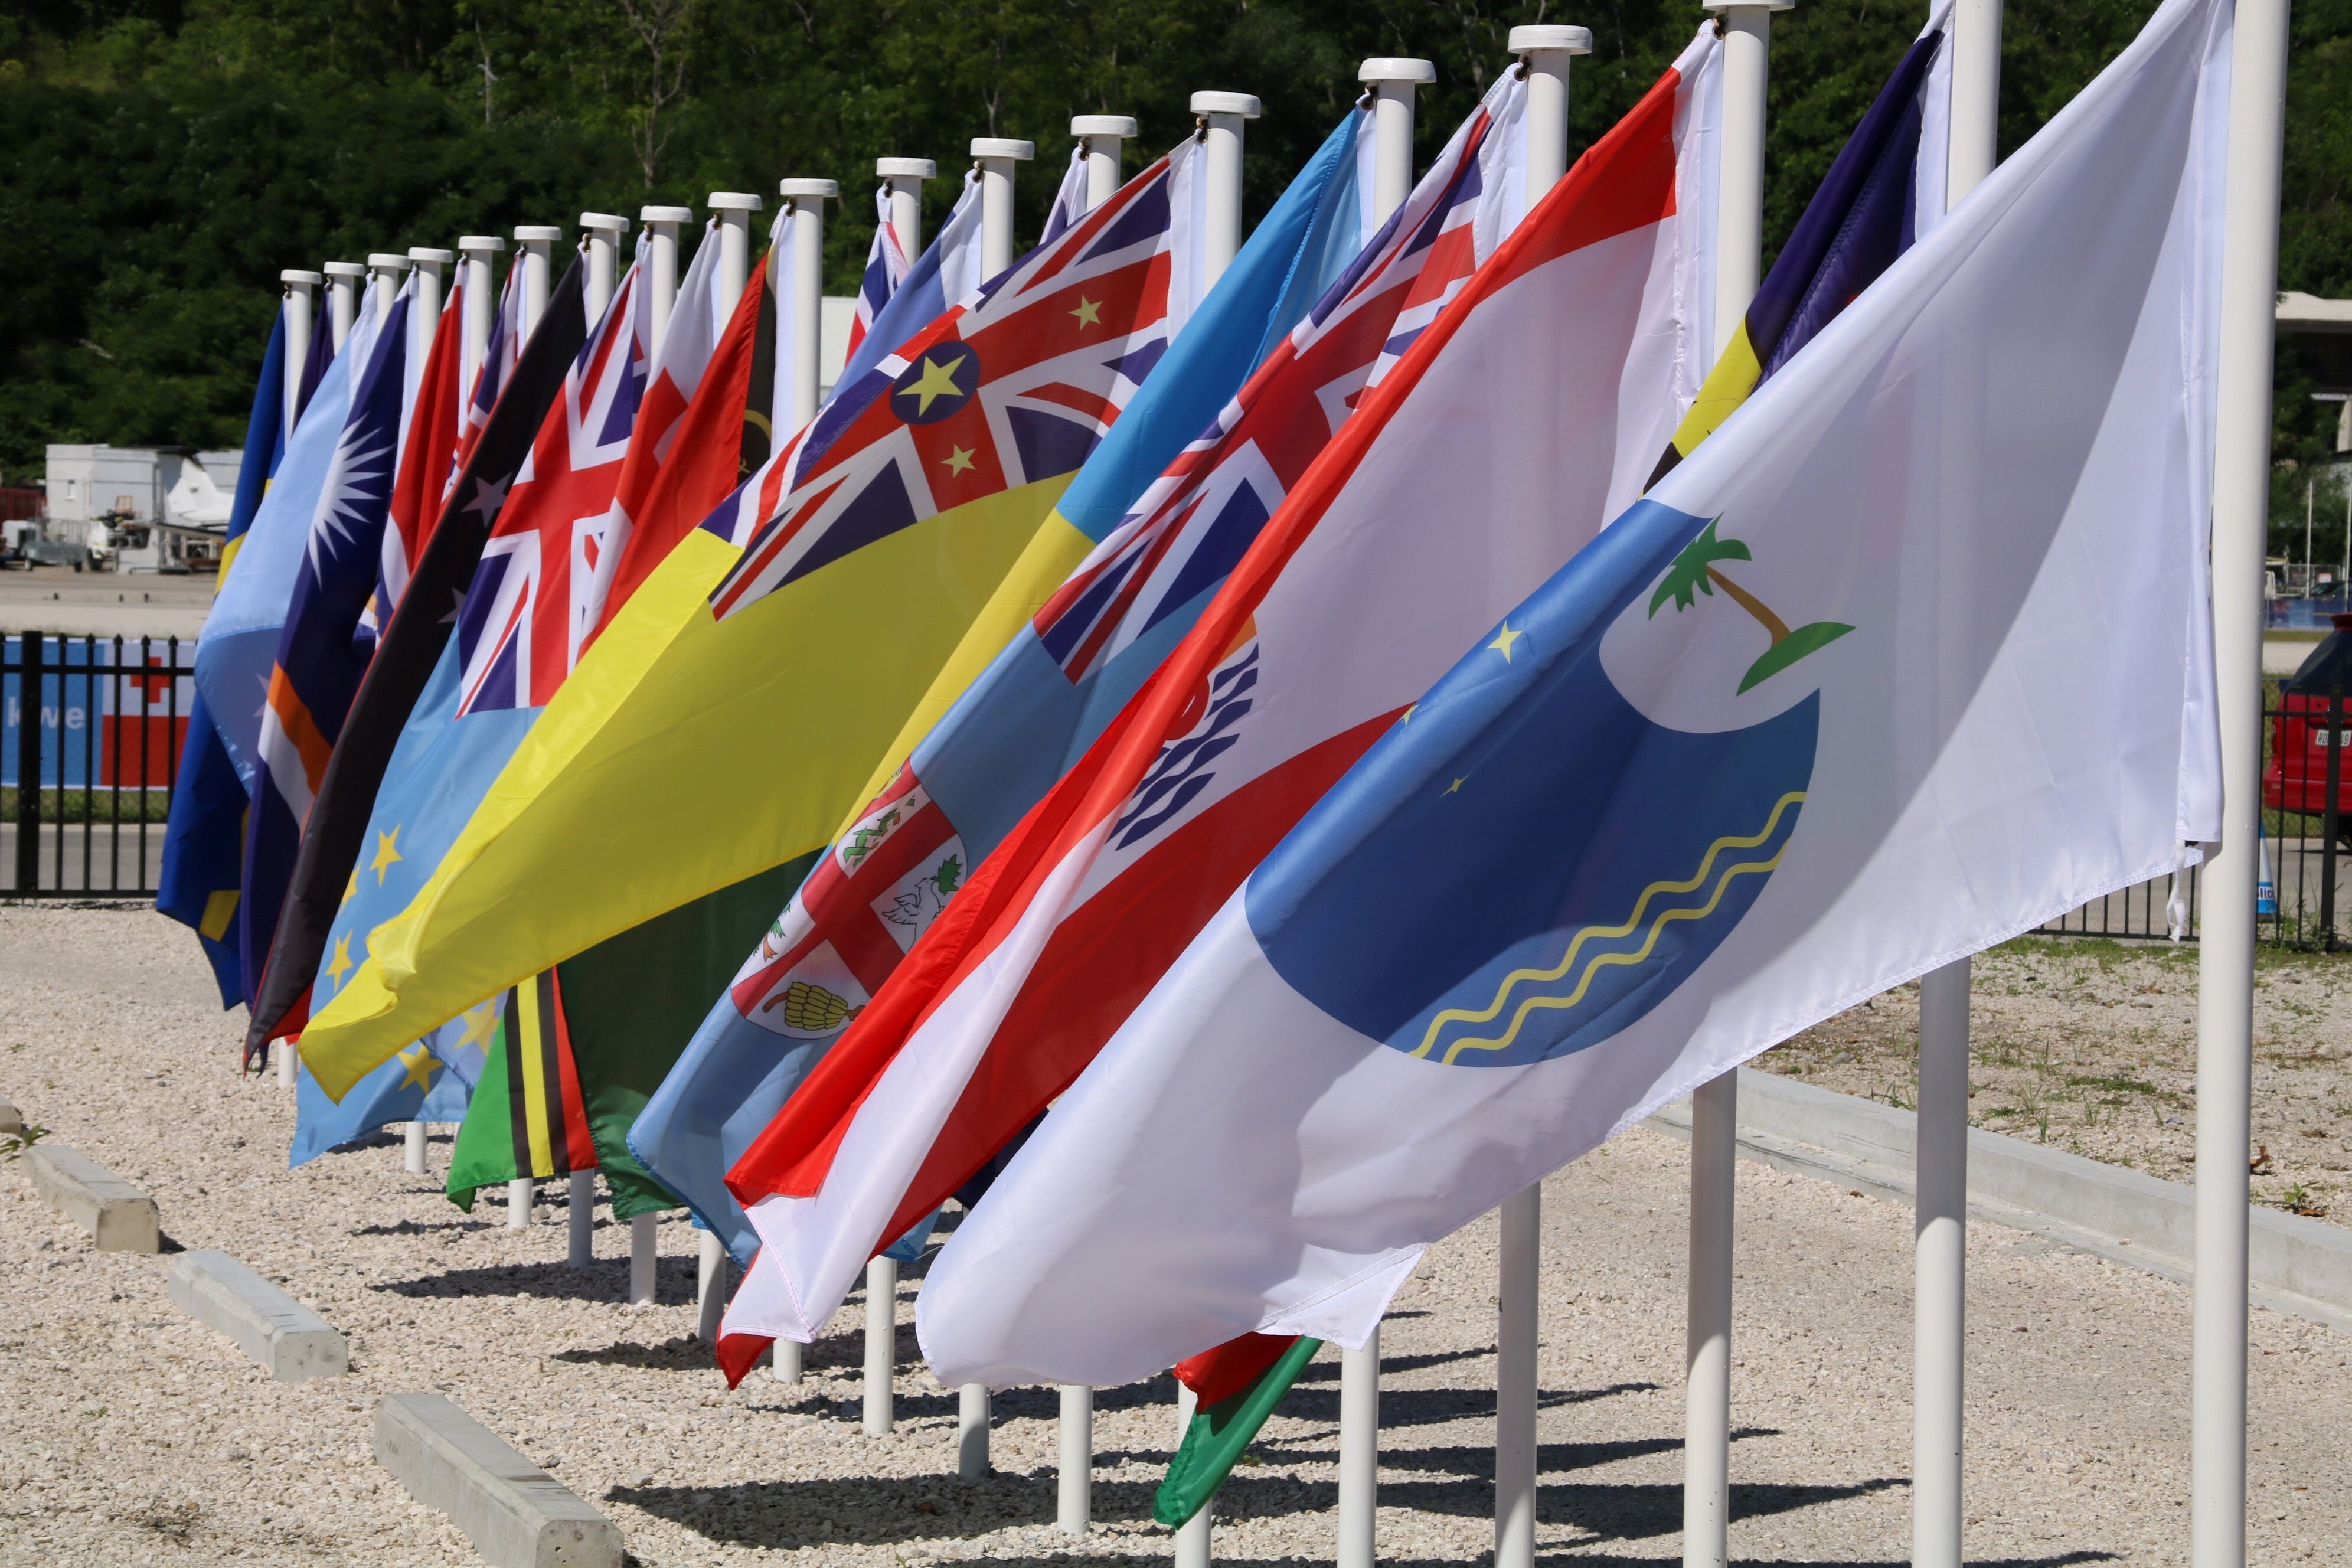 The flags representing the 18 member countries of the Pacific Islands Forum. Palau has announced it is leaving, and more nations could follow. Photo: AFP